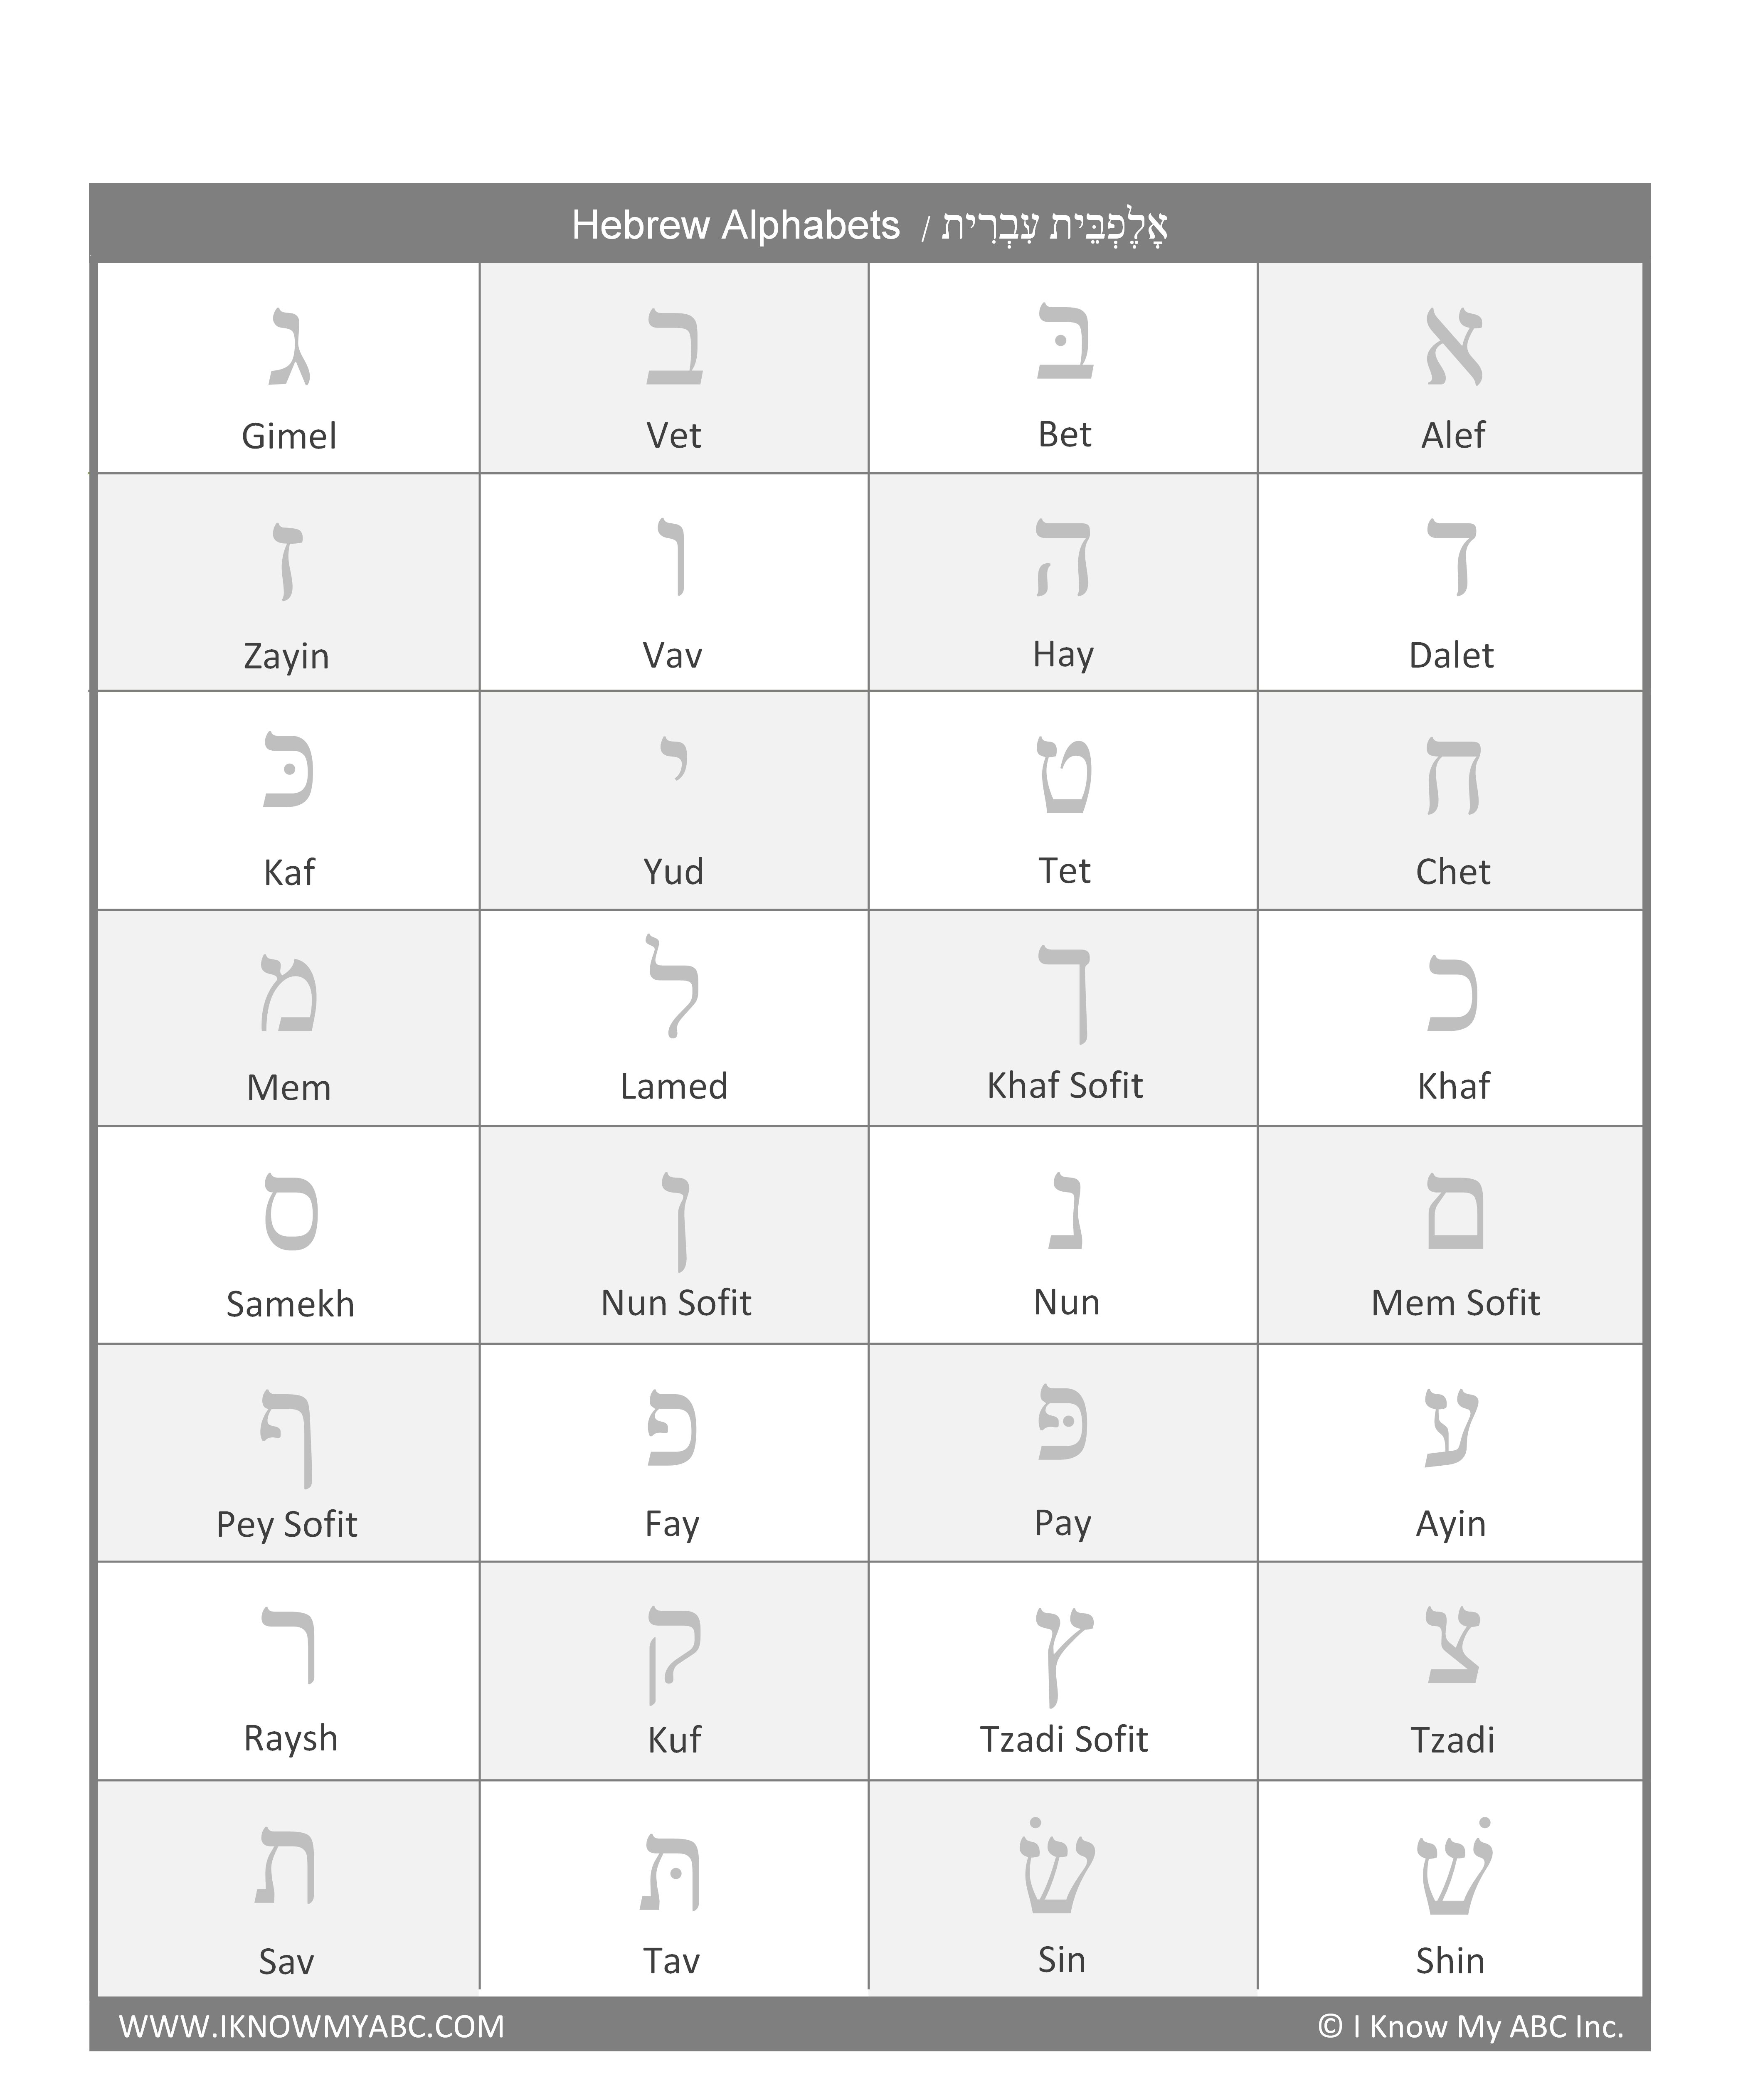 learn-hebrew-alphabet-free-educational-resources-i-know-my-abc-inc